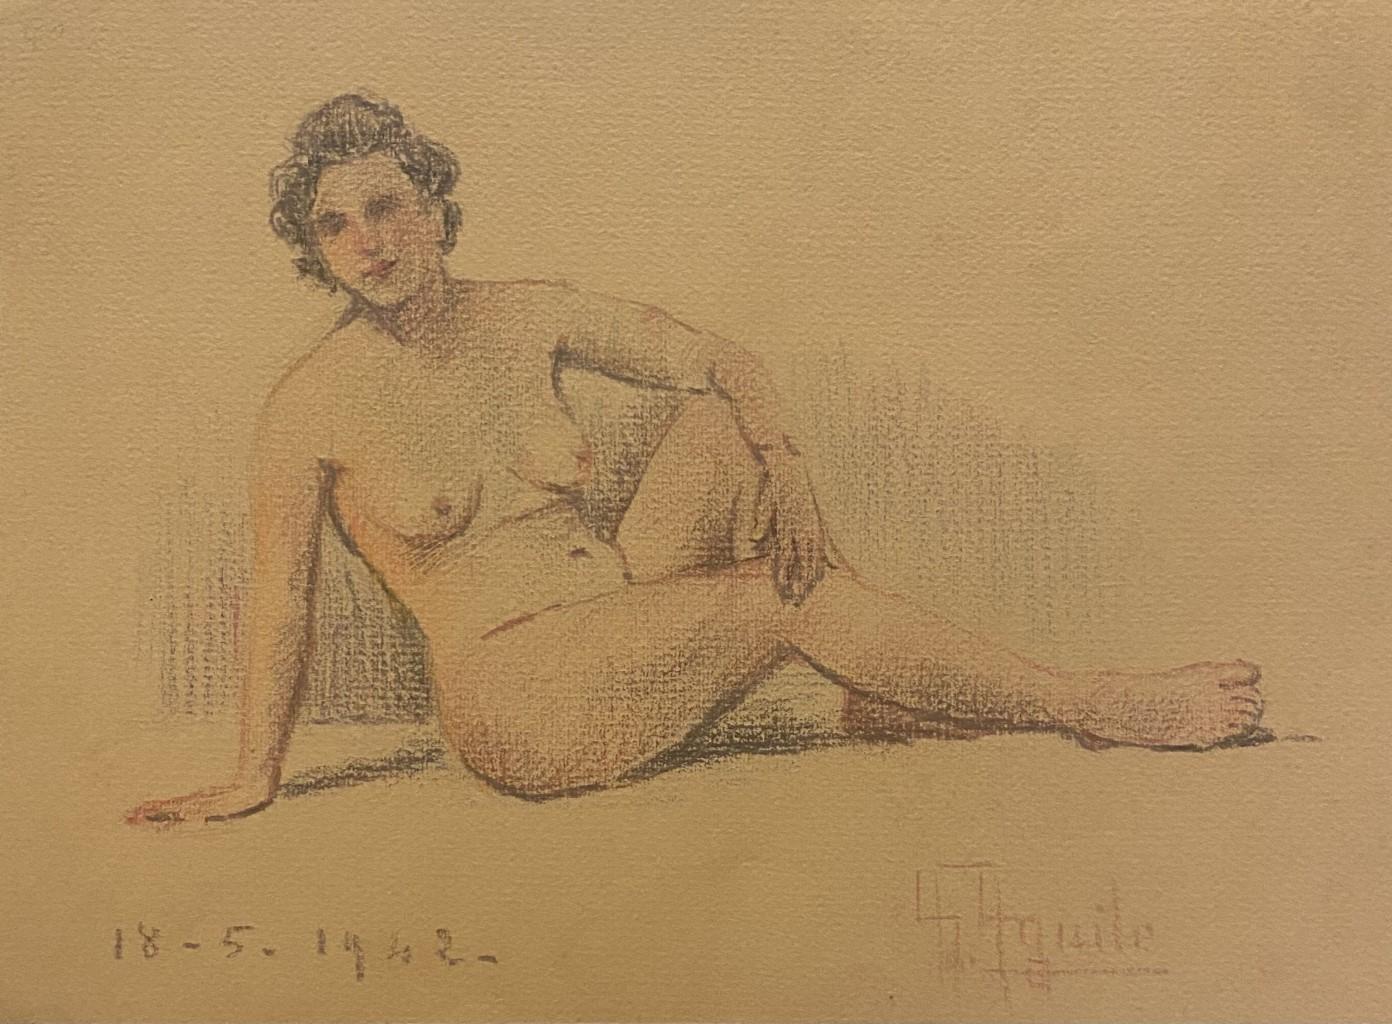 Unknown Figurative Art - Nude of Woman - Original Pencil and Pastels Drawing - Mid-20th Century